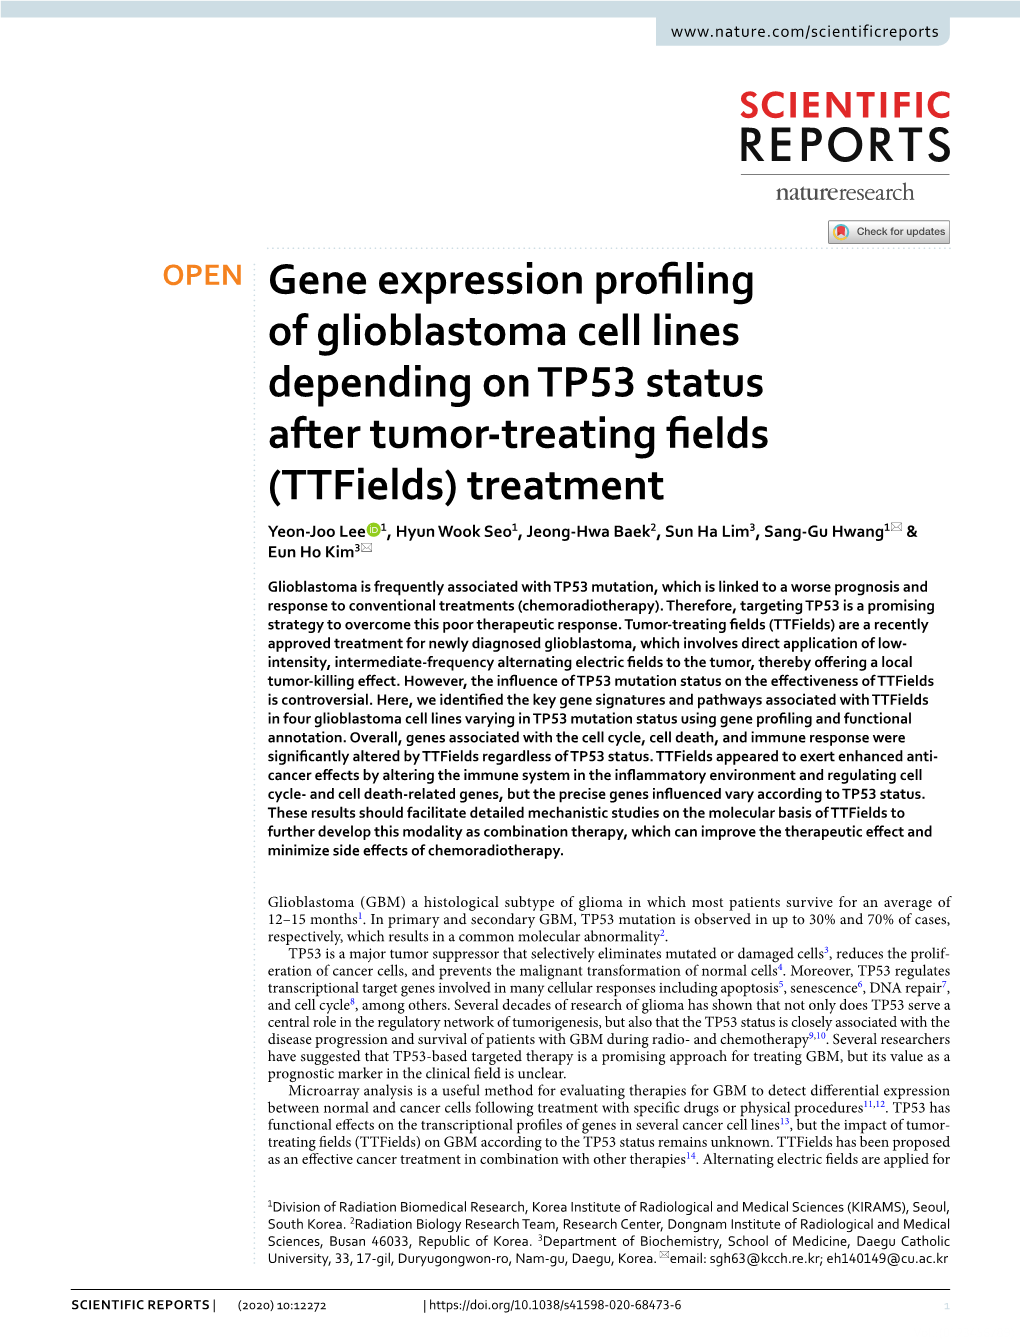 Gene Expression Profiling of Glioblastoma Cell Lines